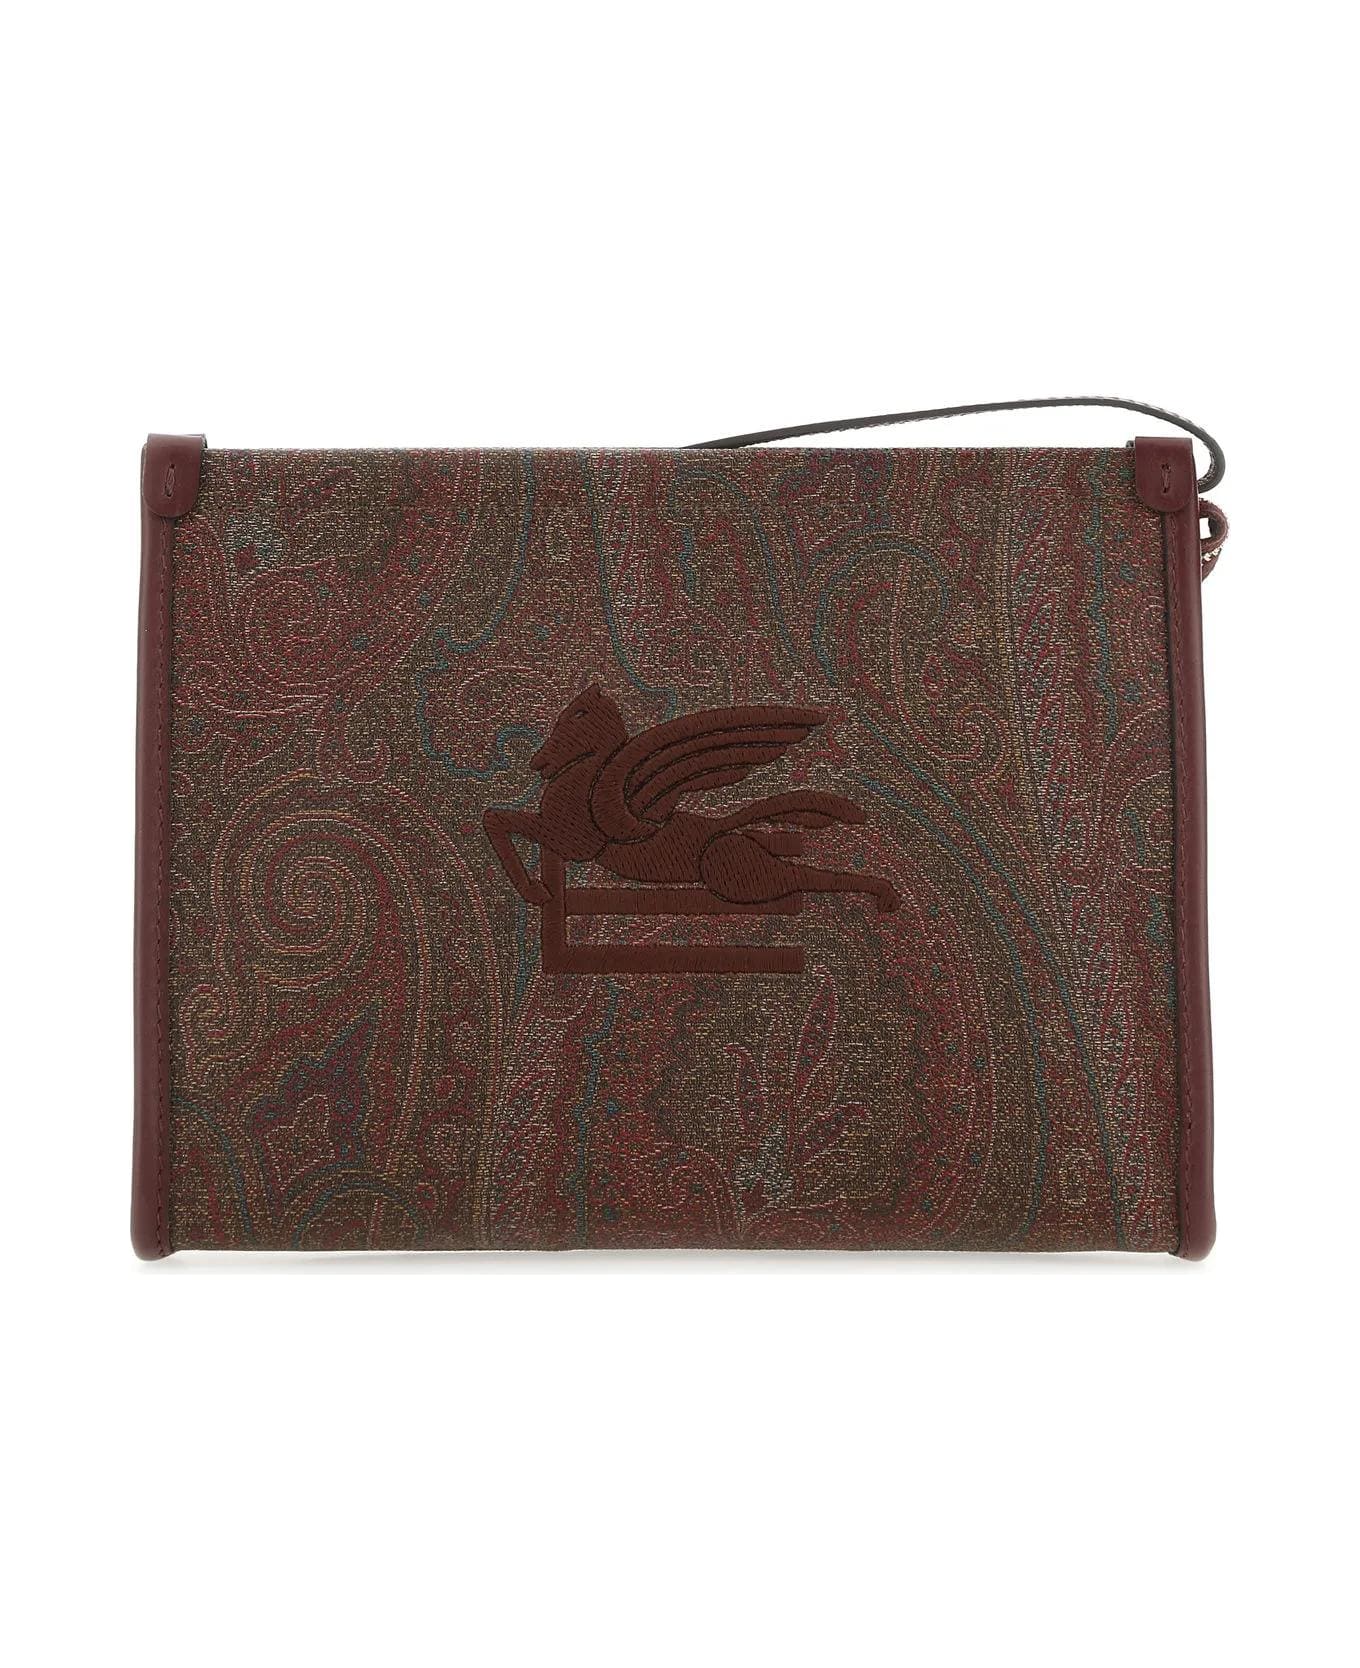 Etro Printed Fabric Pouch - Red